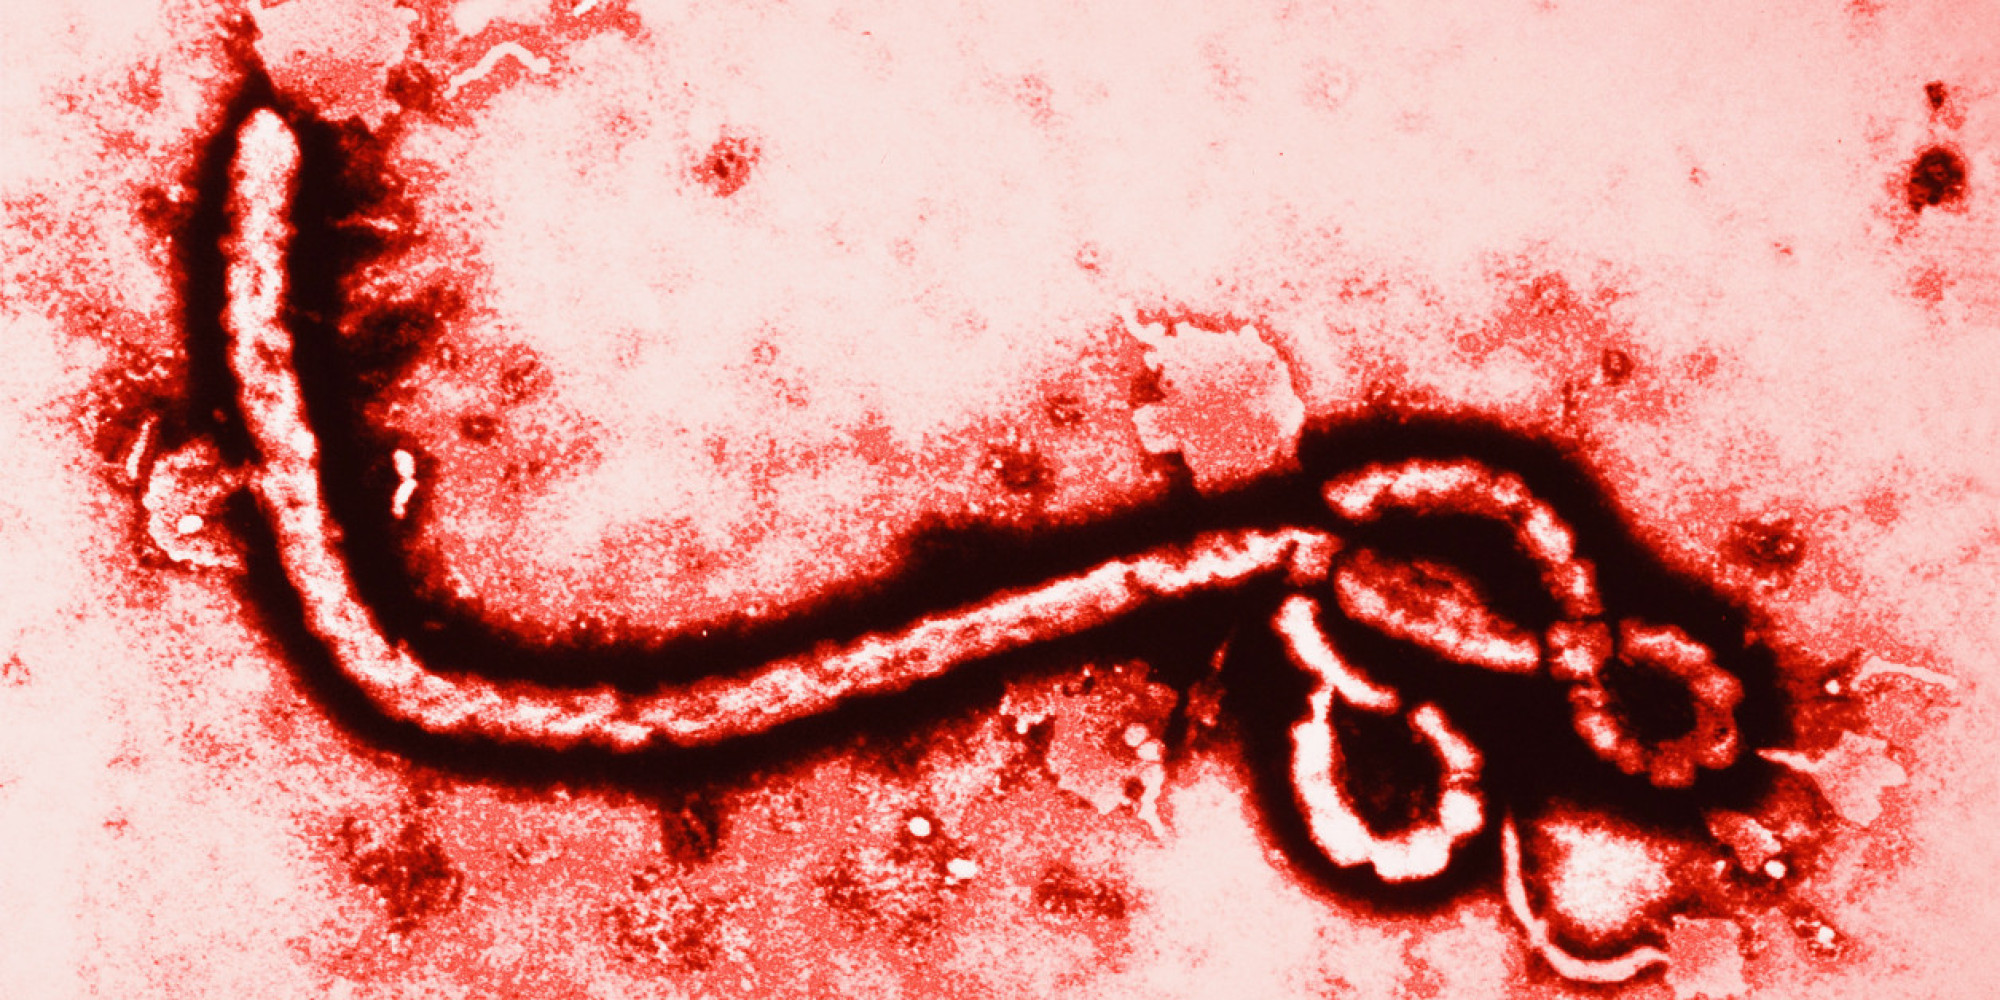 Is there Ebola in Chad, Africa?